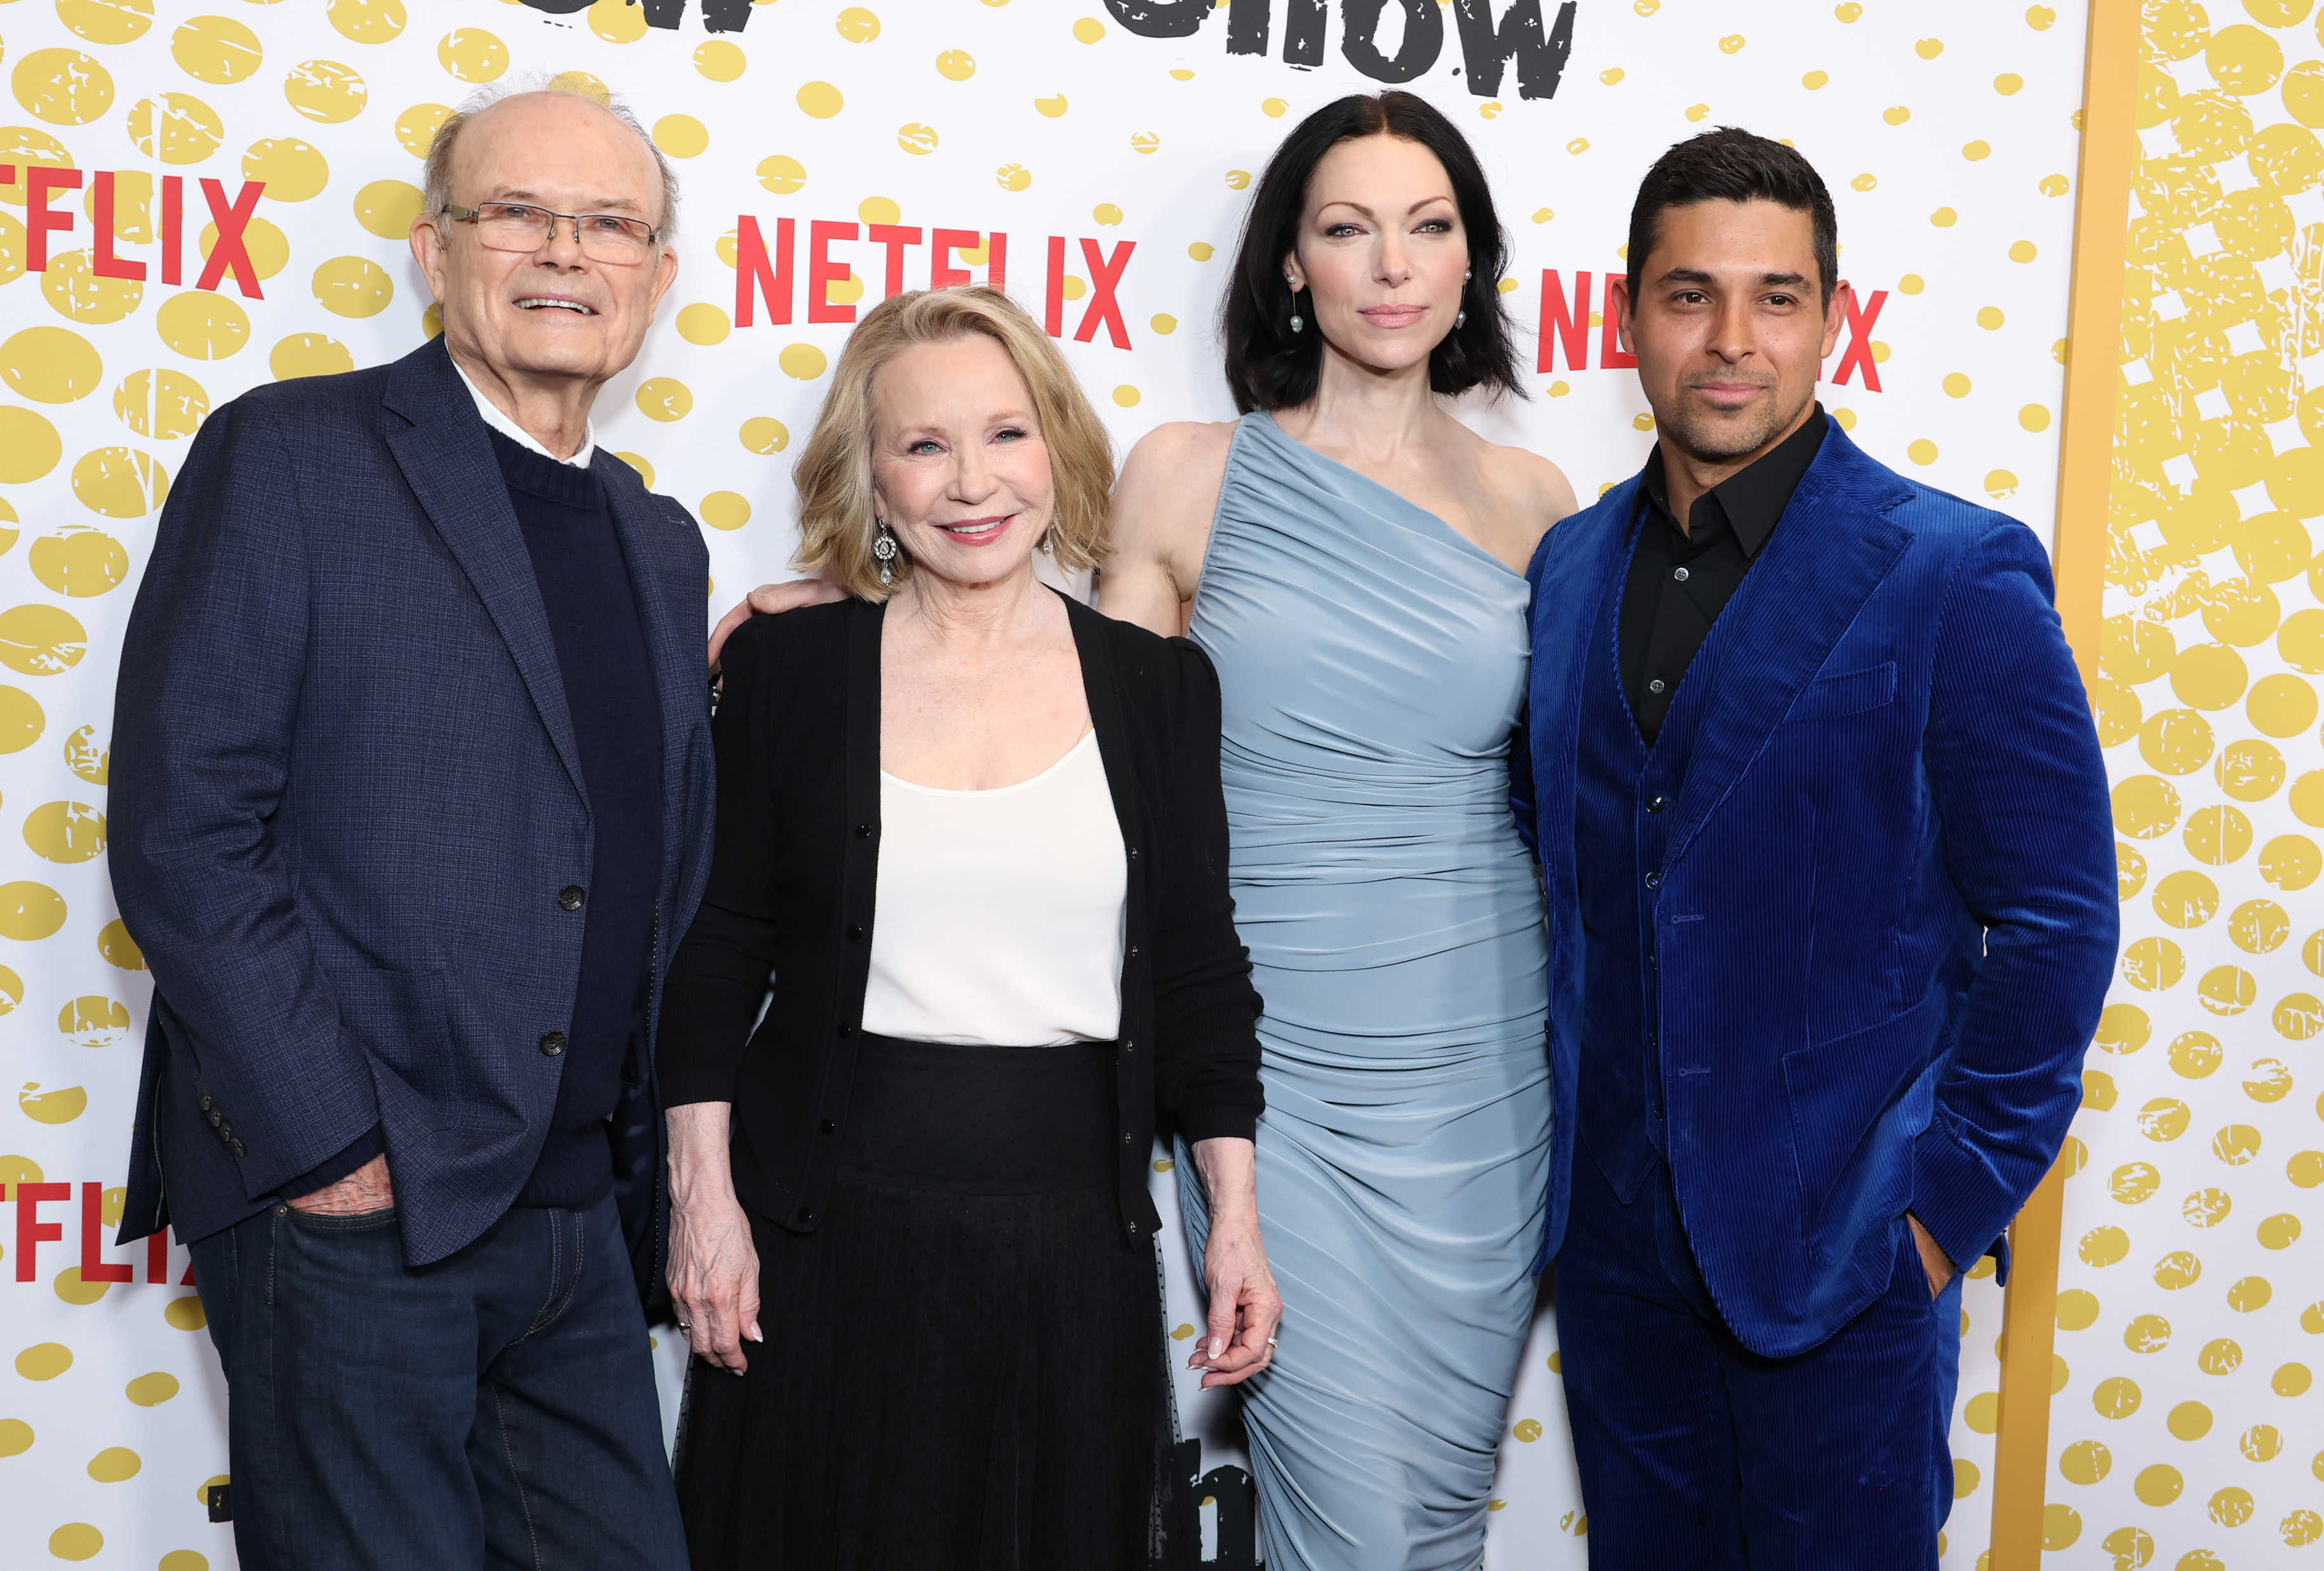 Kurtwood Smith, Debra Jo Rupp, Laura Prepon, and Wilmer Valderrama stand together for a red carpet photo